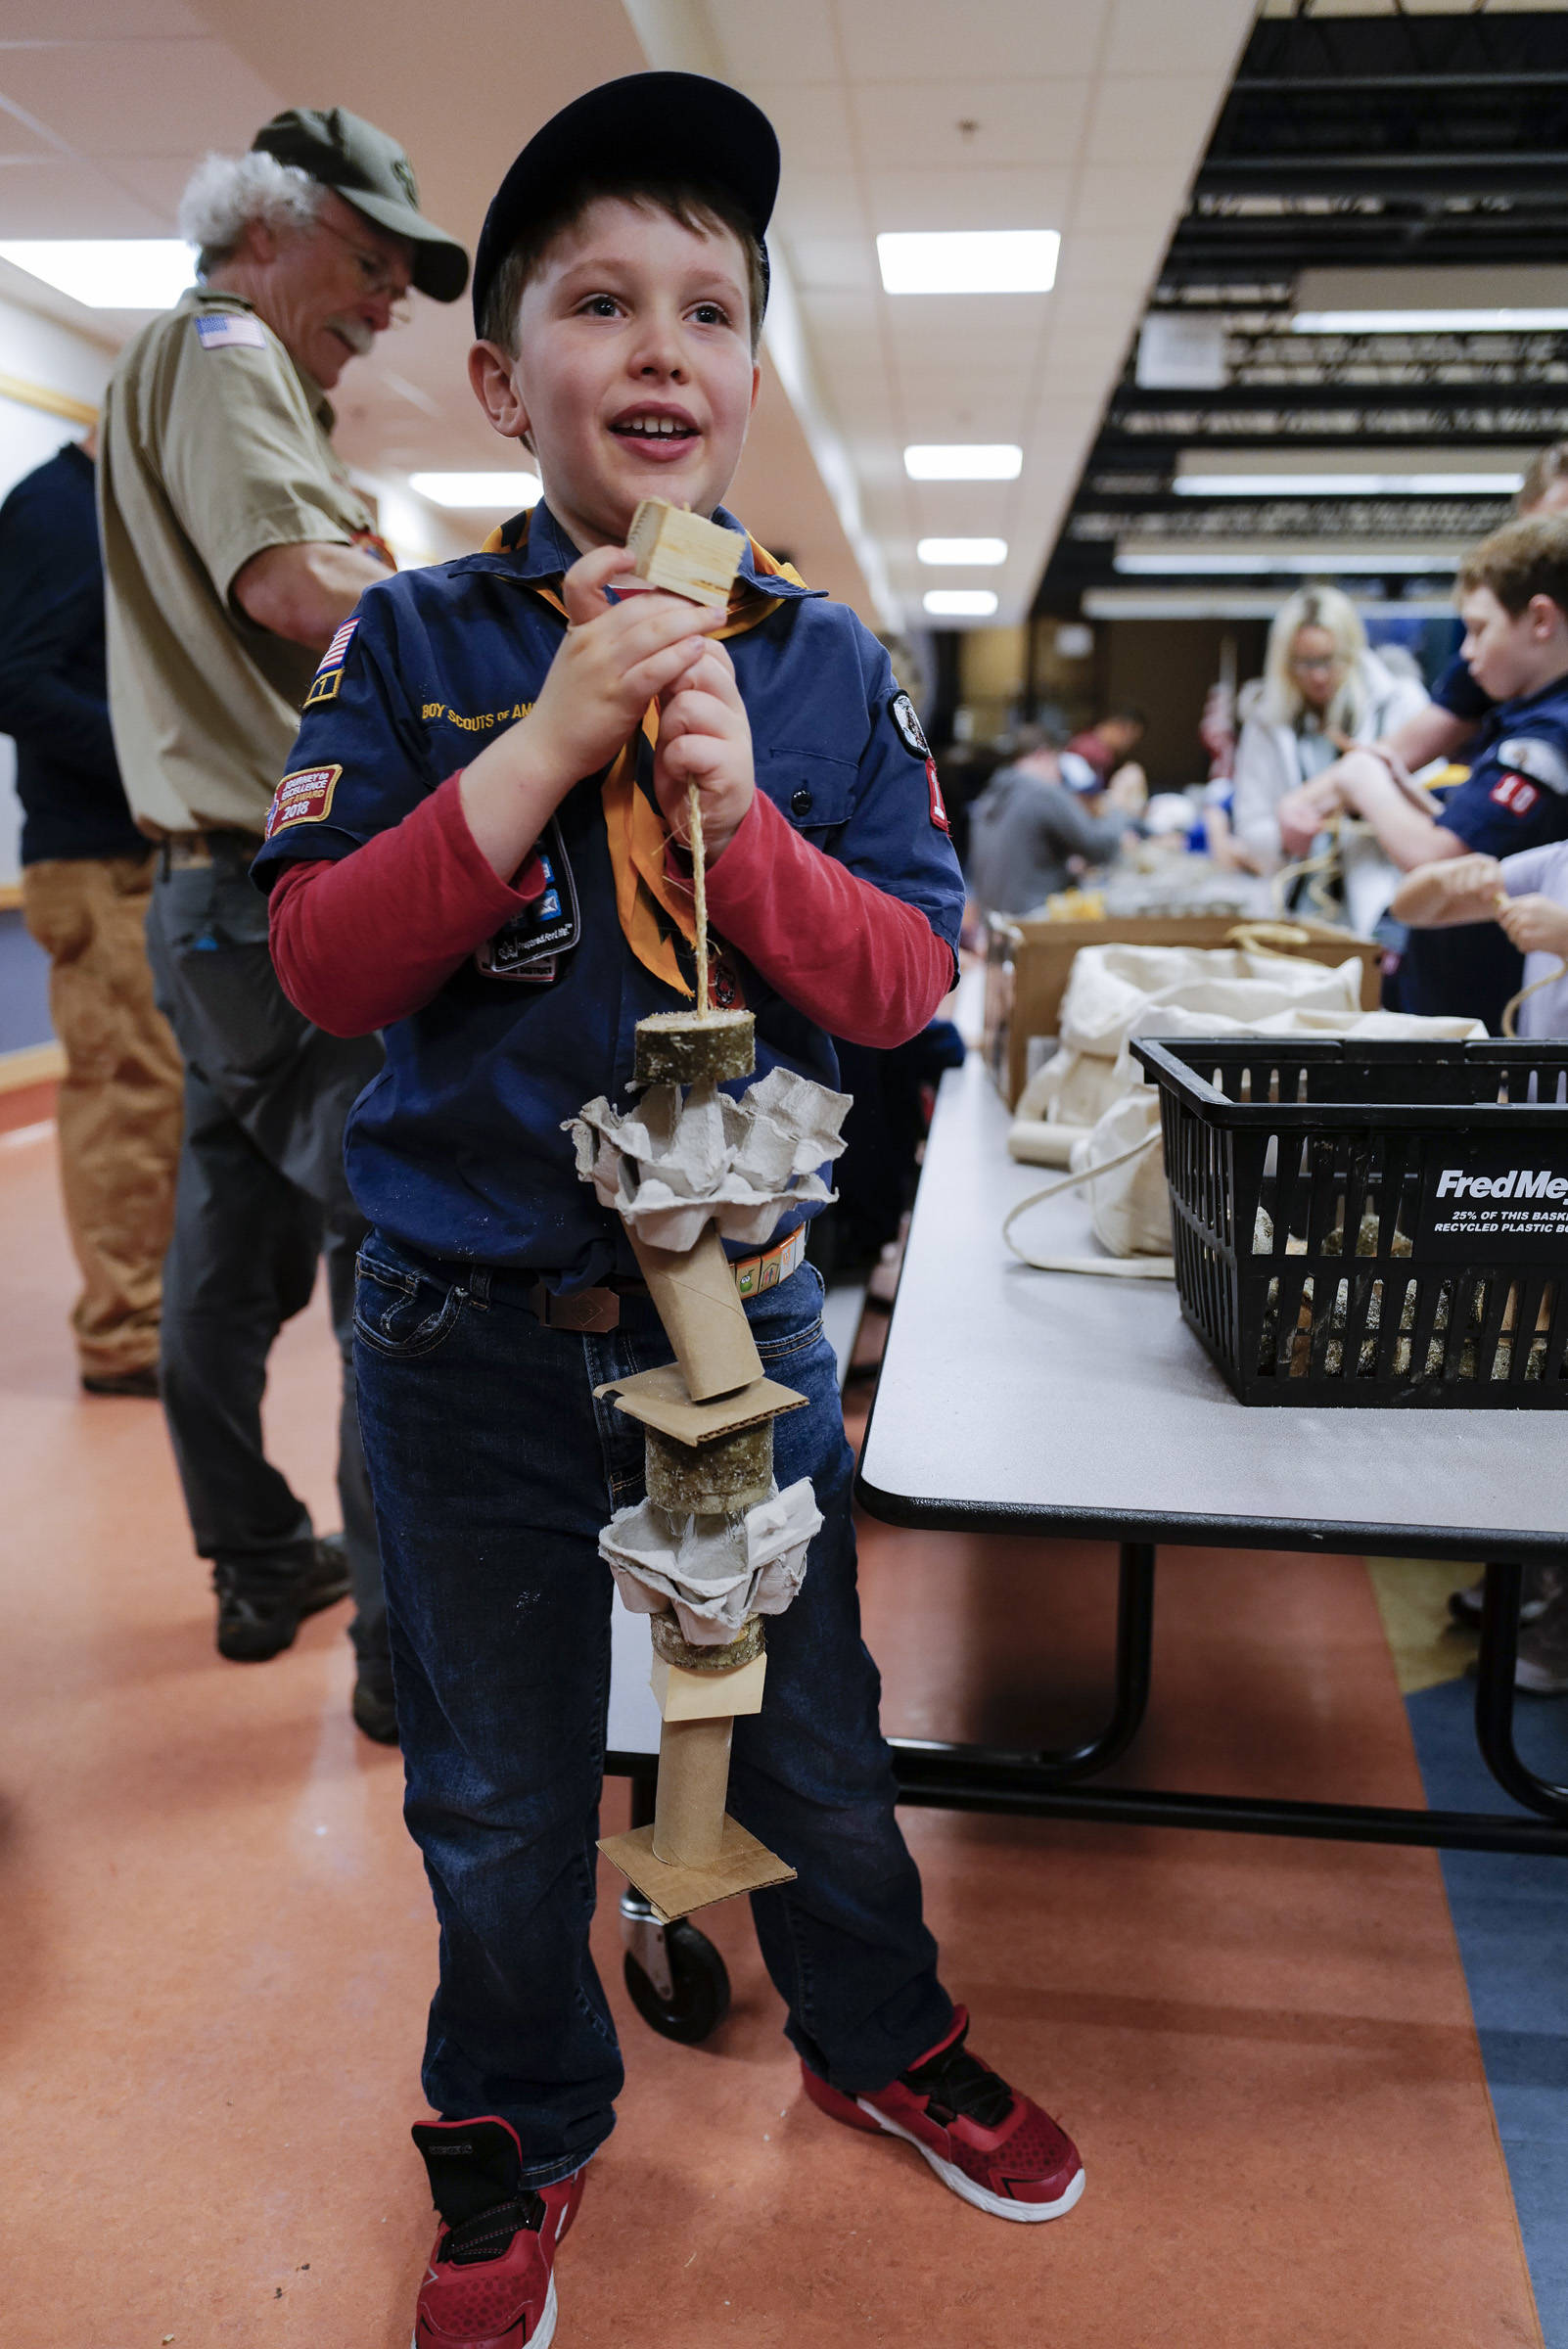 Oliver Robertson, 8, tops off an enrichment toy for birds he constructed during a cub scout pack meeting at Harborview Elementary School on Friday, Nov. 22, 2019. About 25 cub scouts constructed the toys as a service project for the Juneau Raptor Center. (Michael Penn | Juneau Empire)